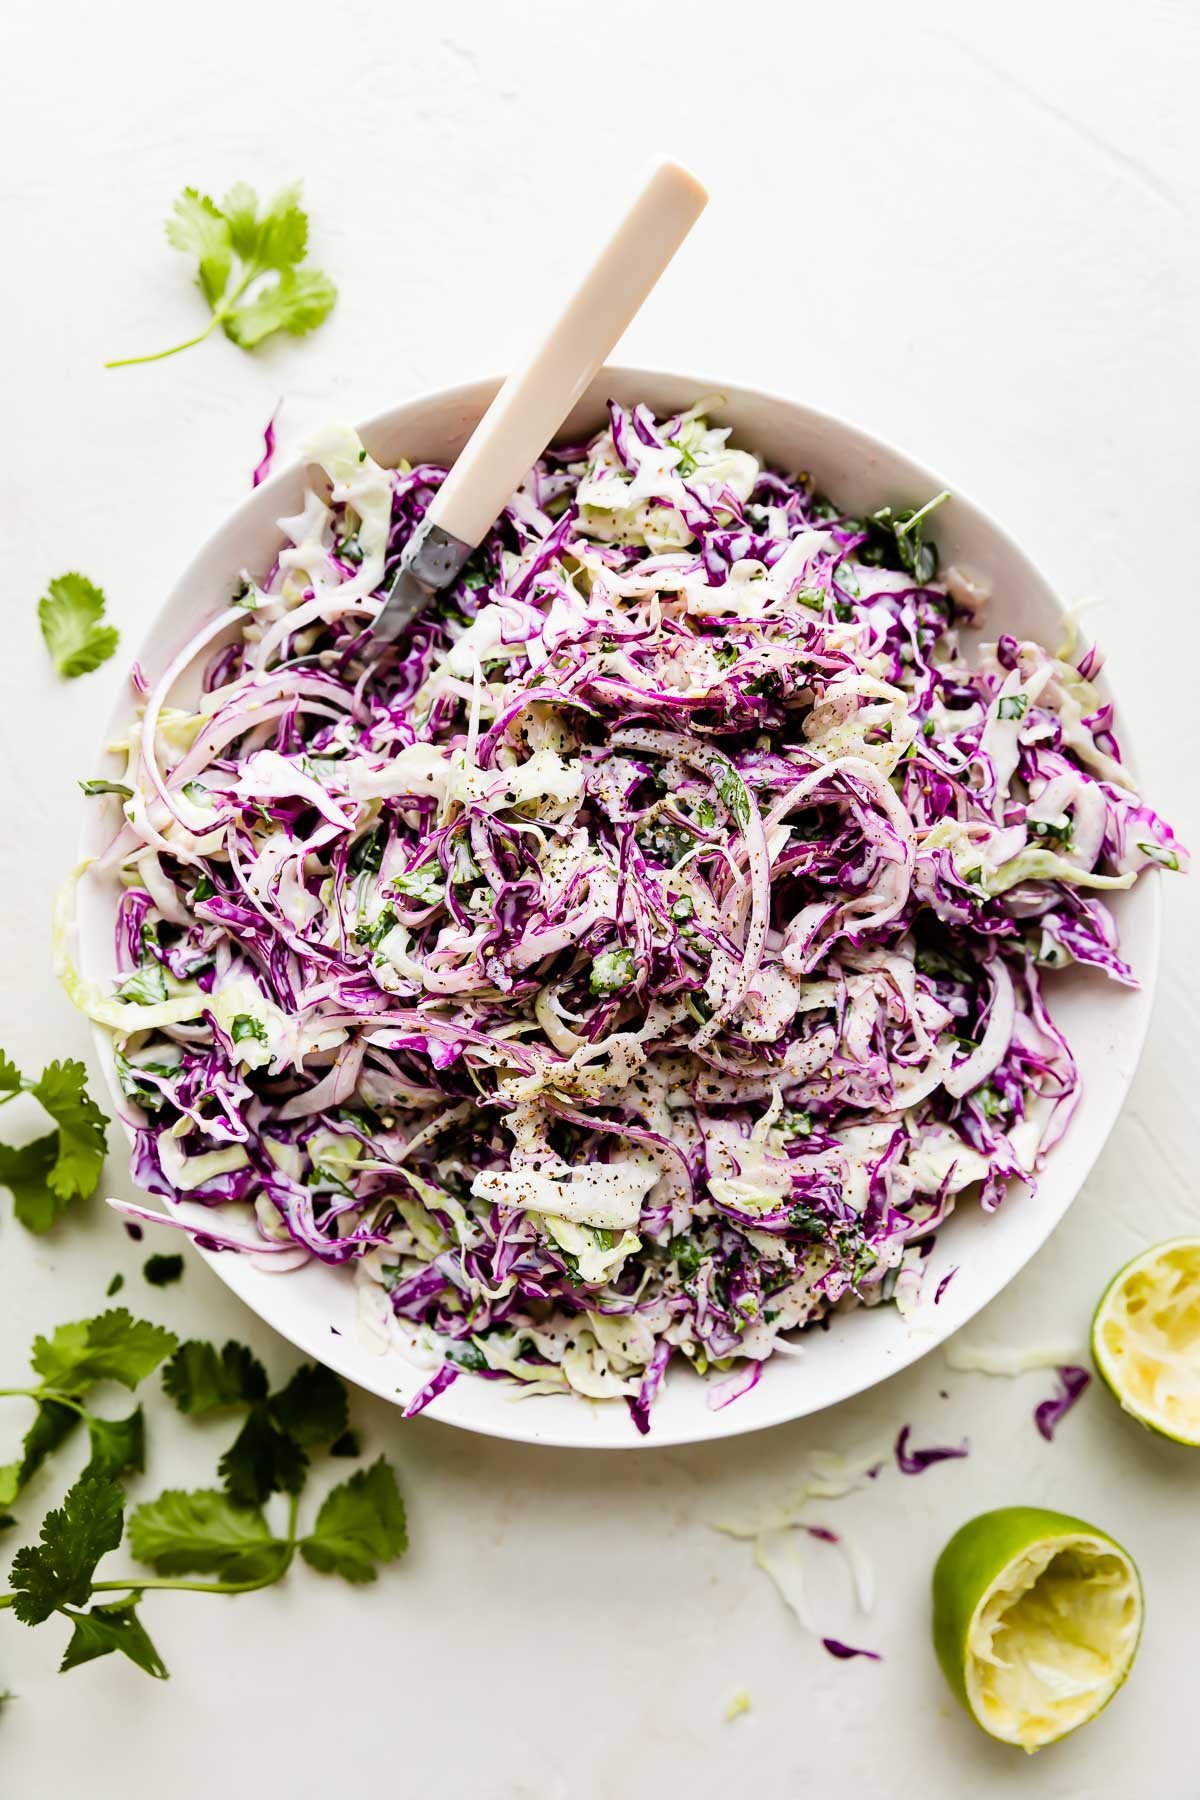 Cilantro ranch slaw fills a large white mixing bowl. The bowl sits atop a creamy white textured surface. A fork rests inside of the bowl and loose fresh herbs and spent lime halves surround the bowl at center.